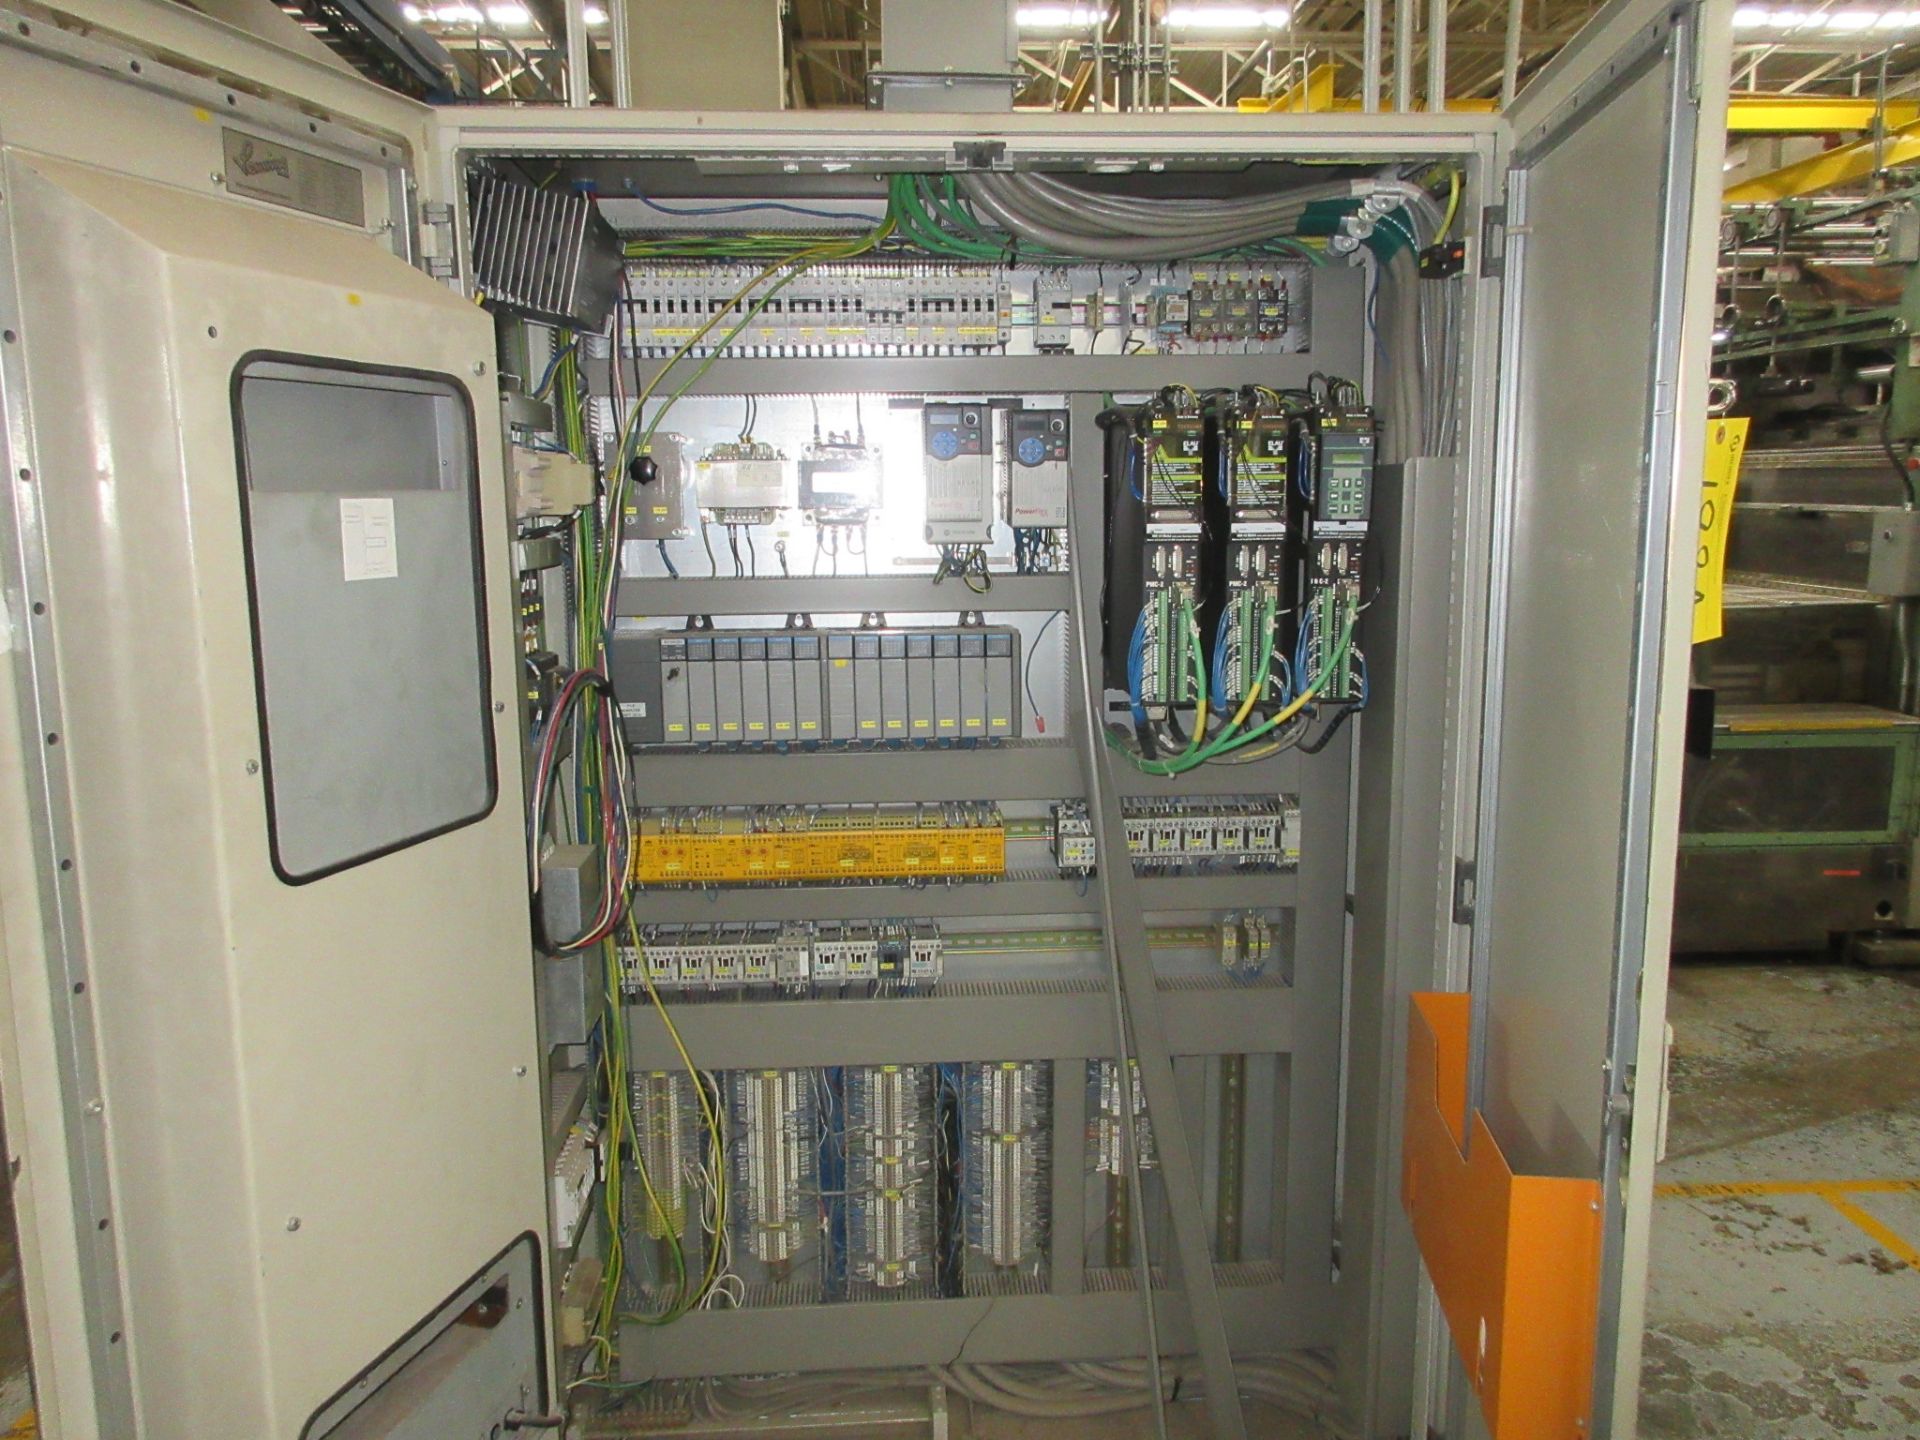 2002 SENNING WRAPPER ELECTRICAL CABINET (LAVAL 64) - Image 5 of 9